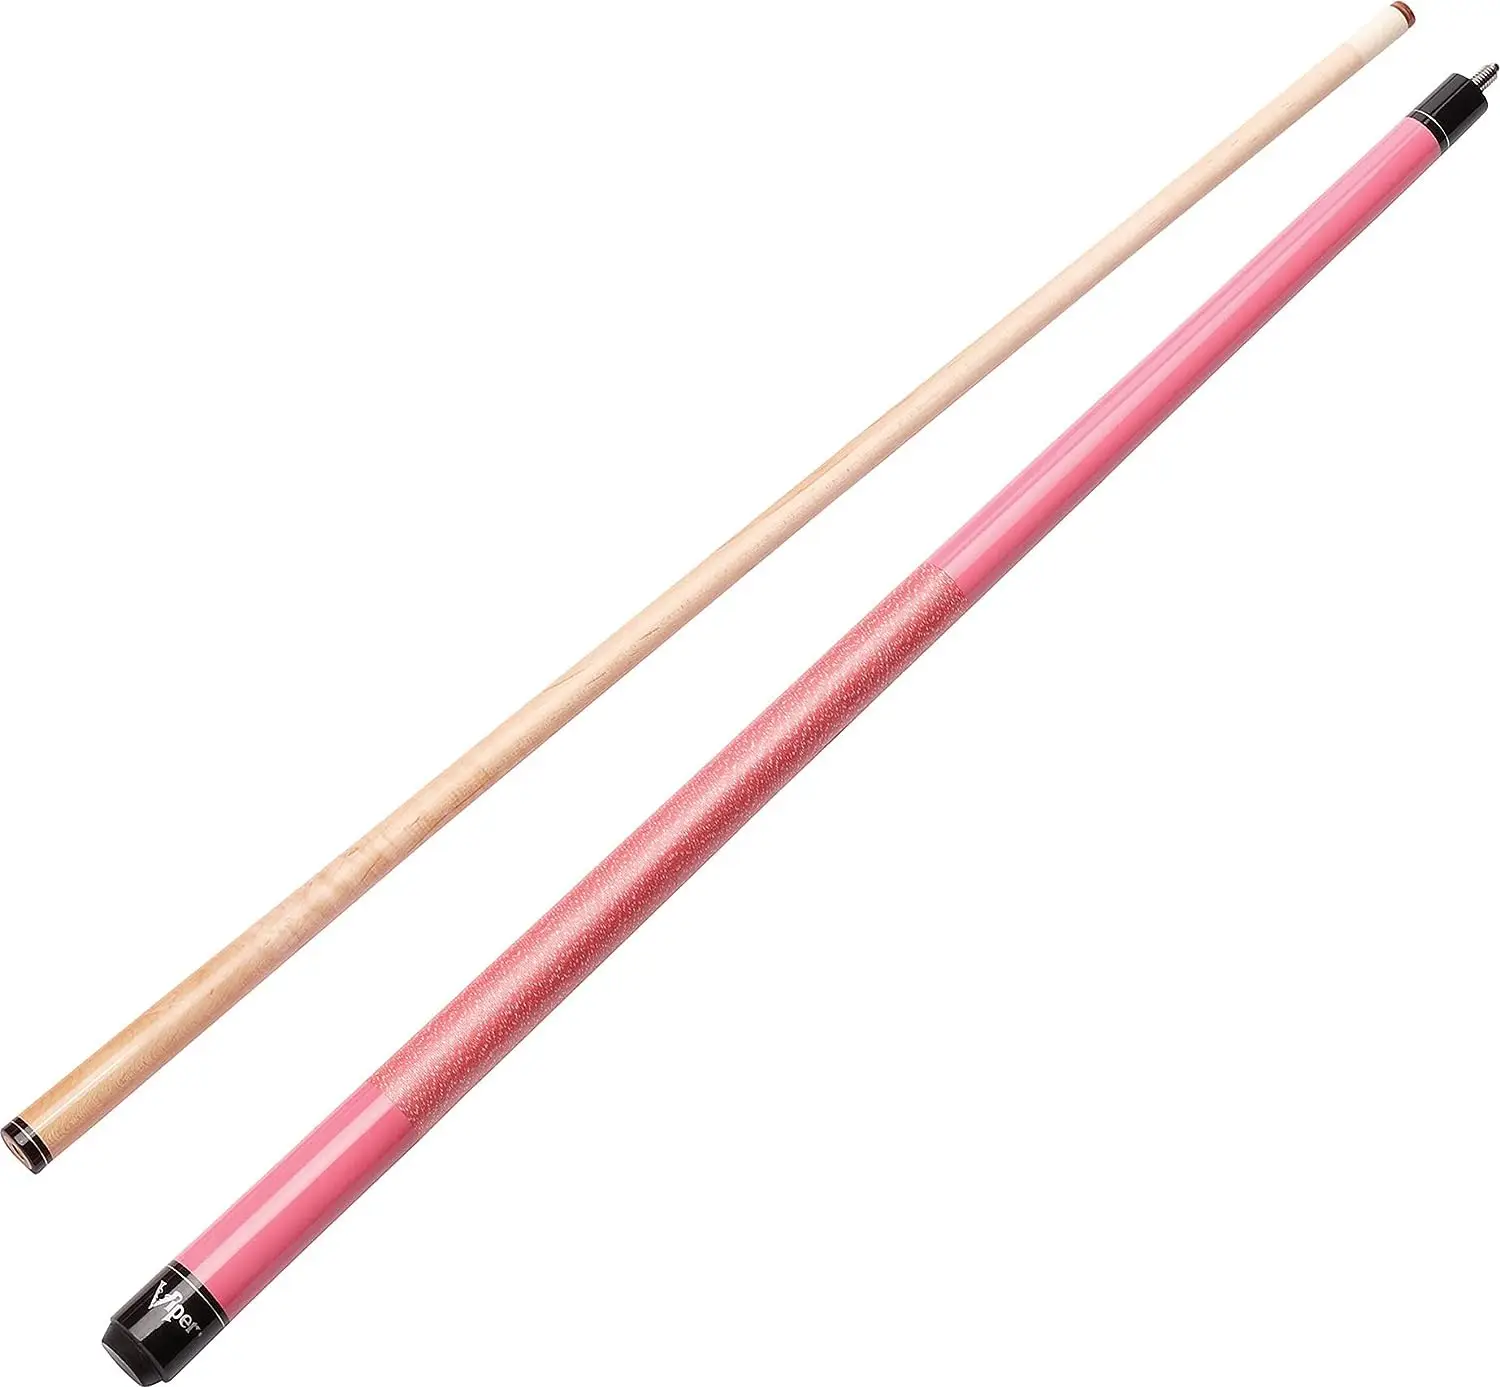 , Pink Lady, 16 Ounce, One Size (50-0401) Pool Gloves Mm Pool Cue Tip Soft Pool Cue Mm Soft Tip Rig